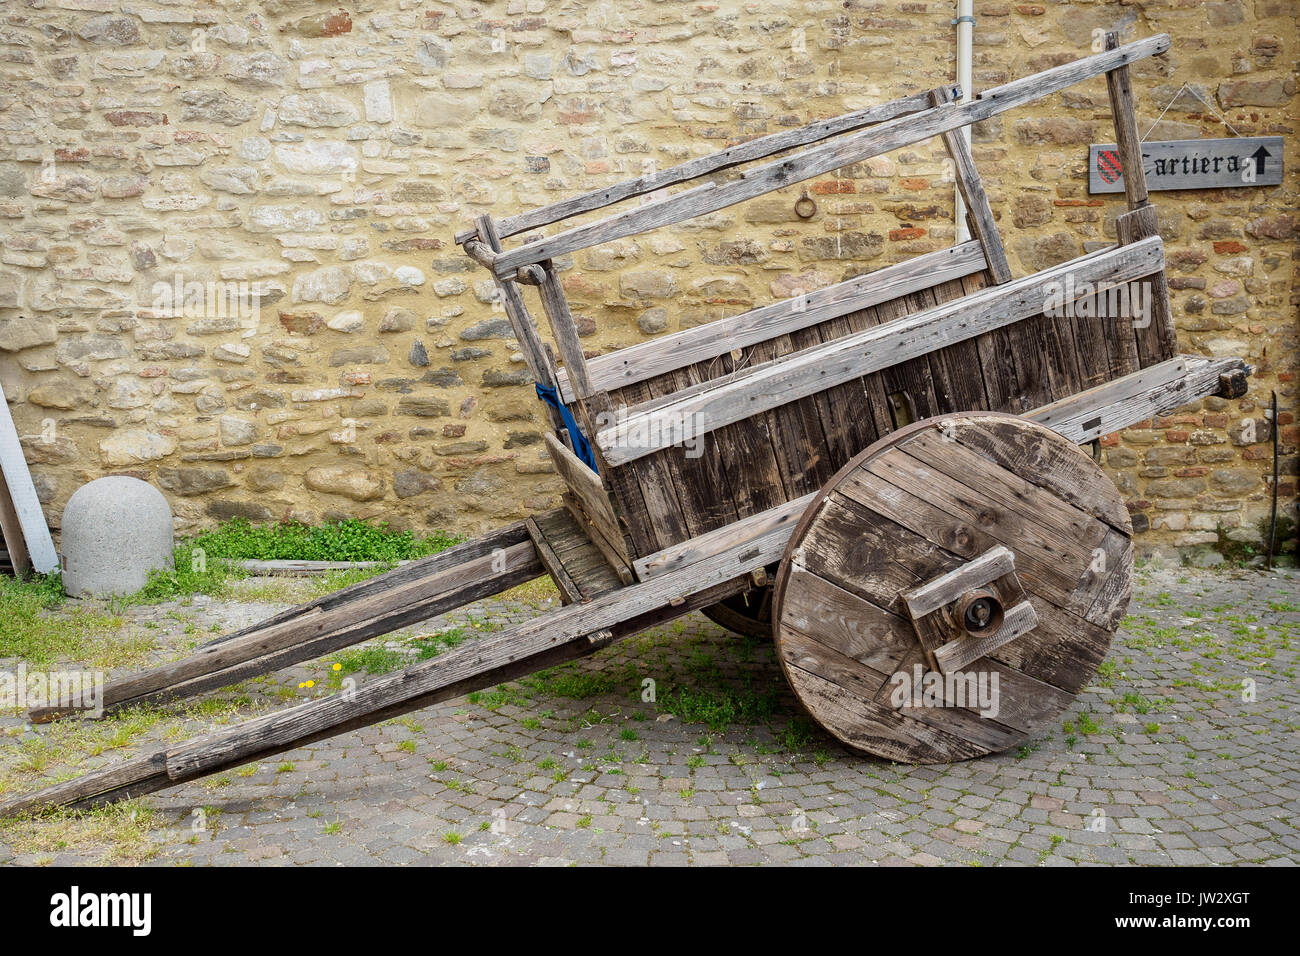 Old wooden cart with a stone masonry wall on the background with a 'cartiera' sign (paper mill in Italian language). Stock Photo